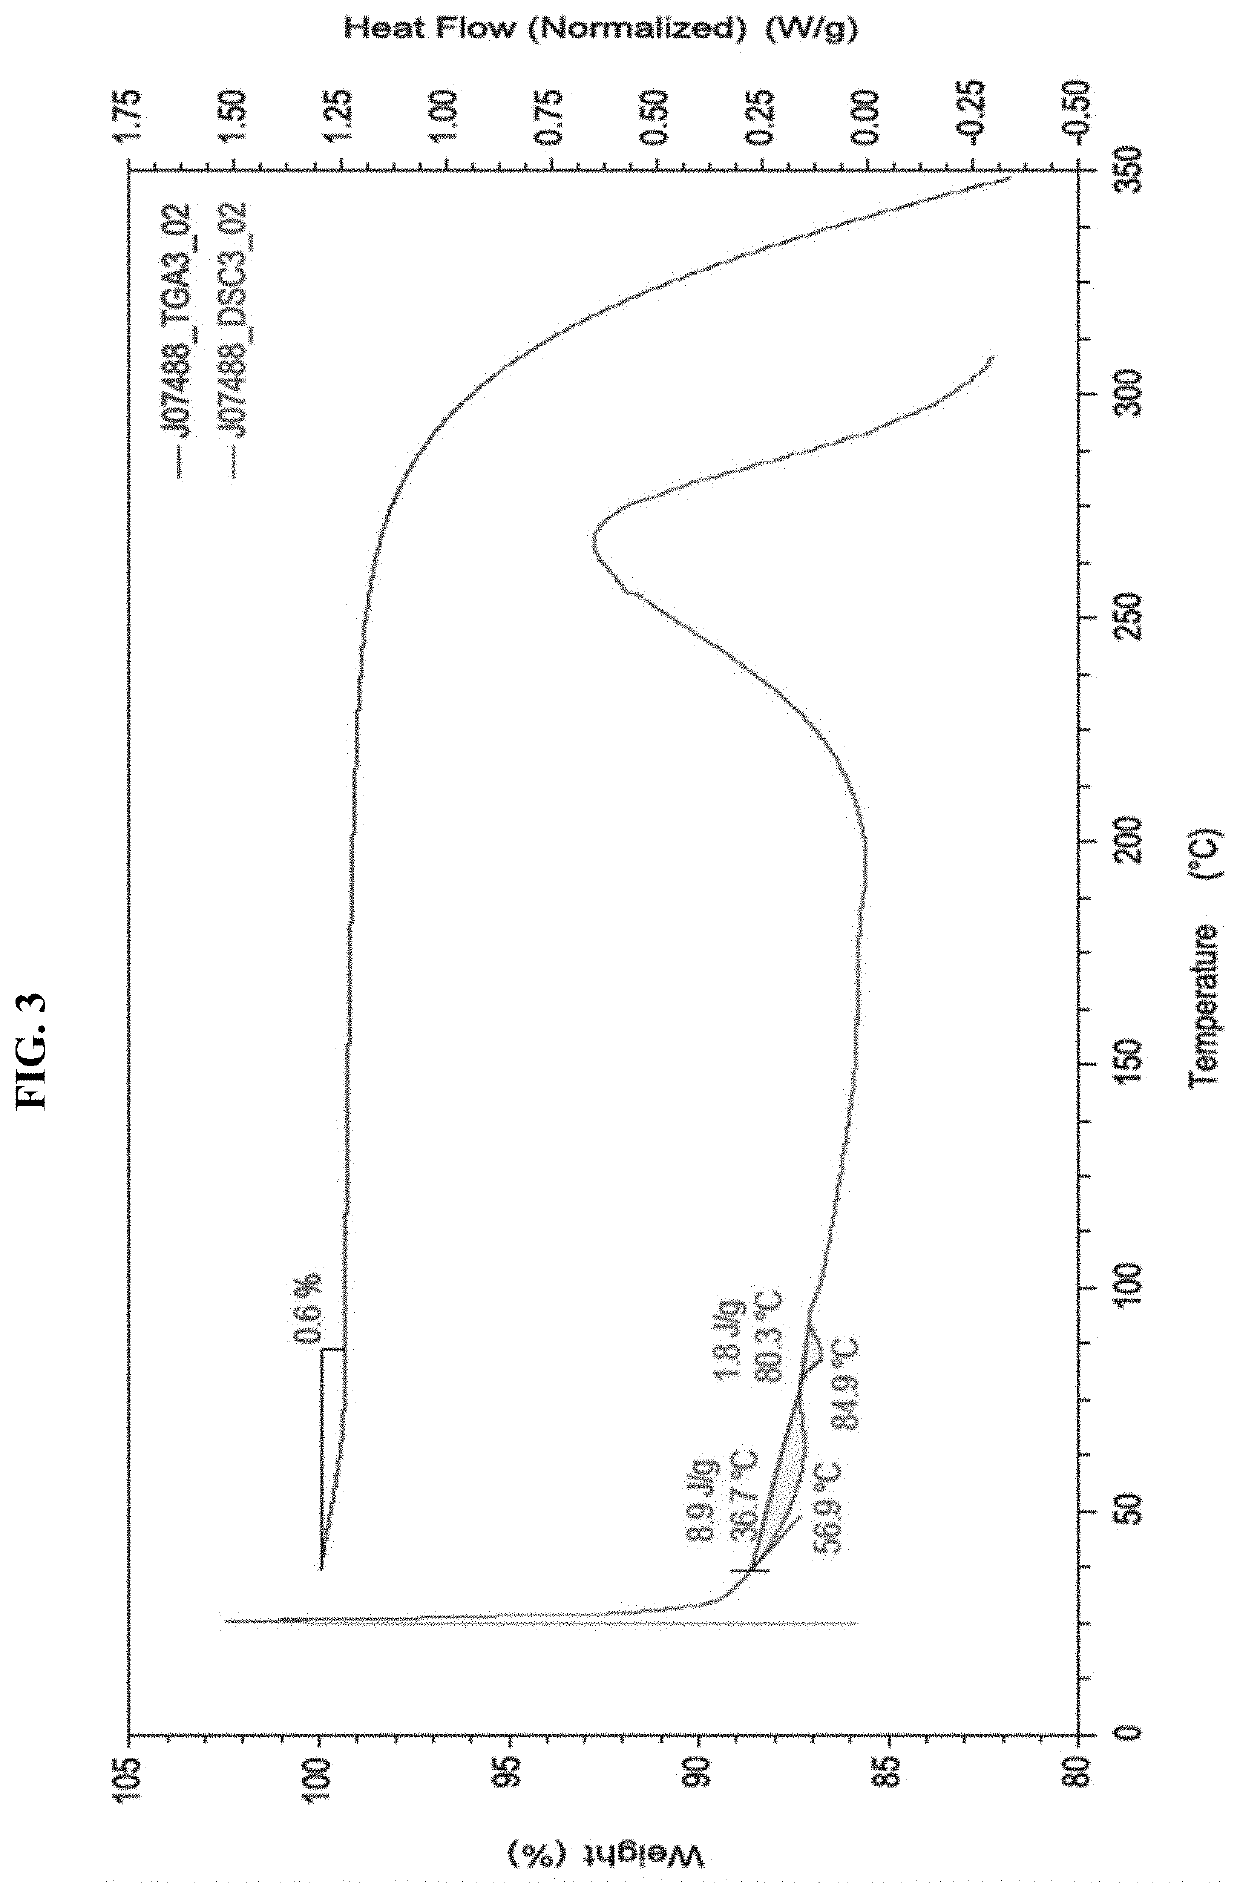 EBNA1 Inhibitor Crystalline Forms, and Methods of Preparing and Using Same